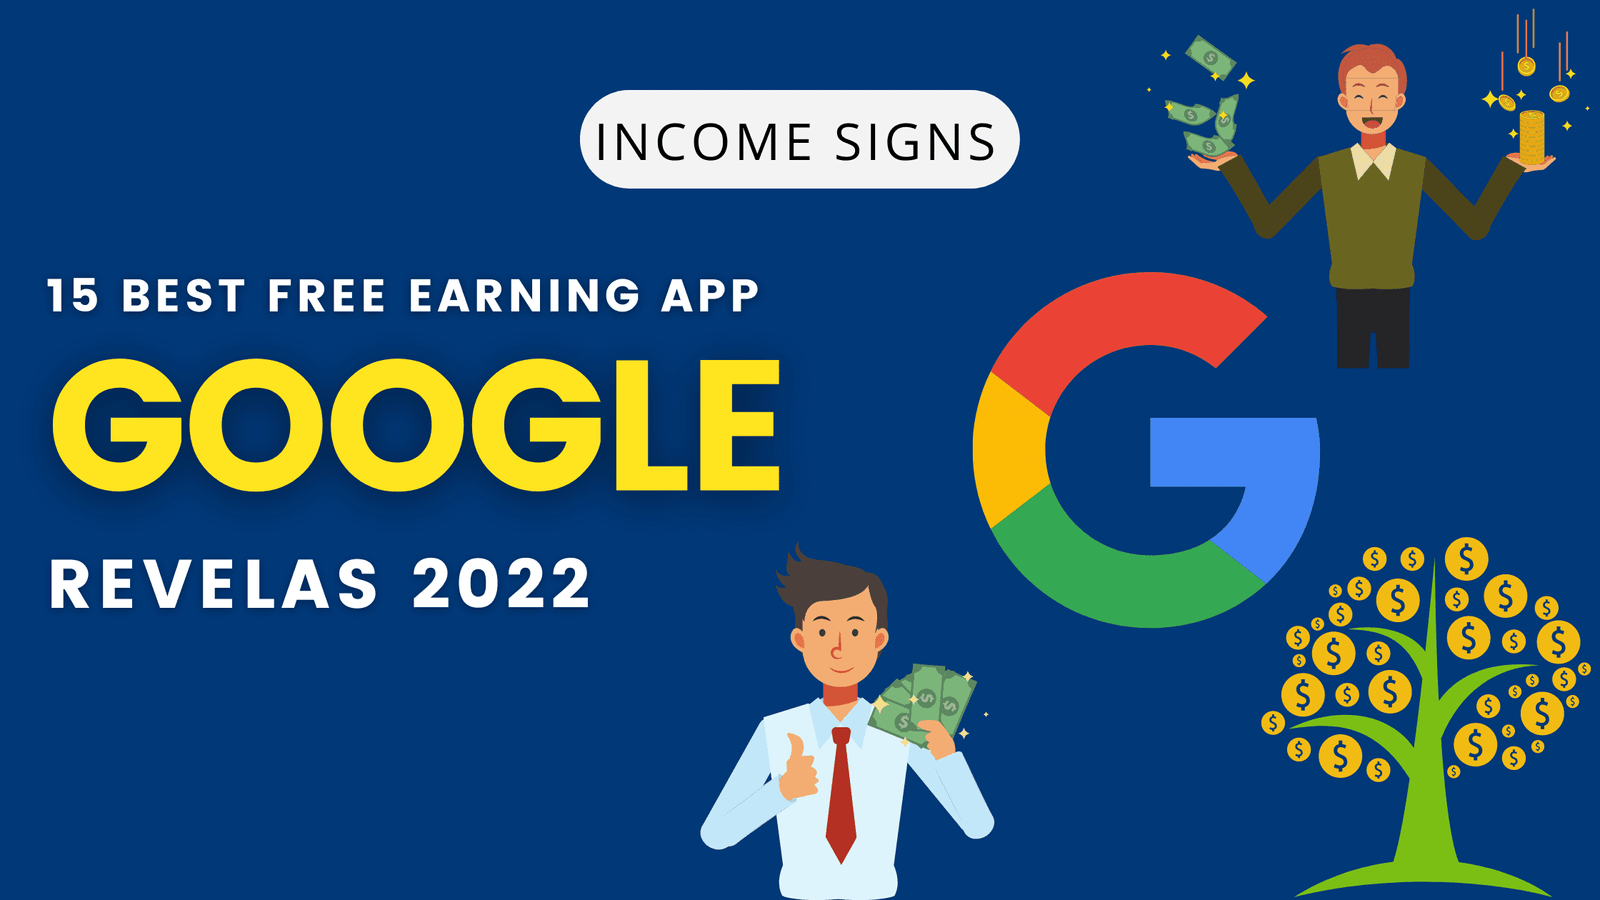 15 Best Free Earning Apps by Google (2022) – Income Signs